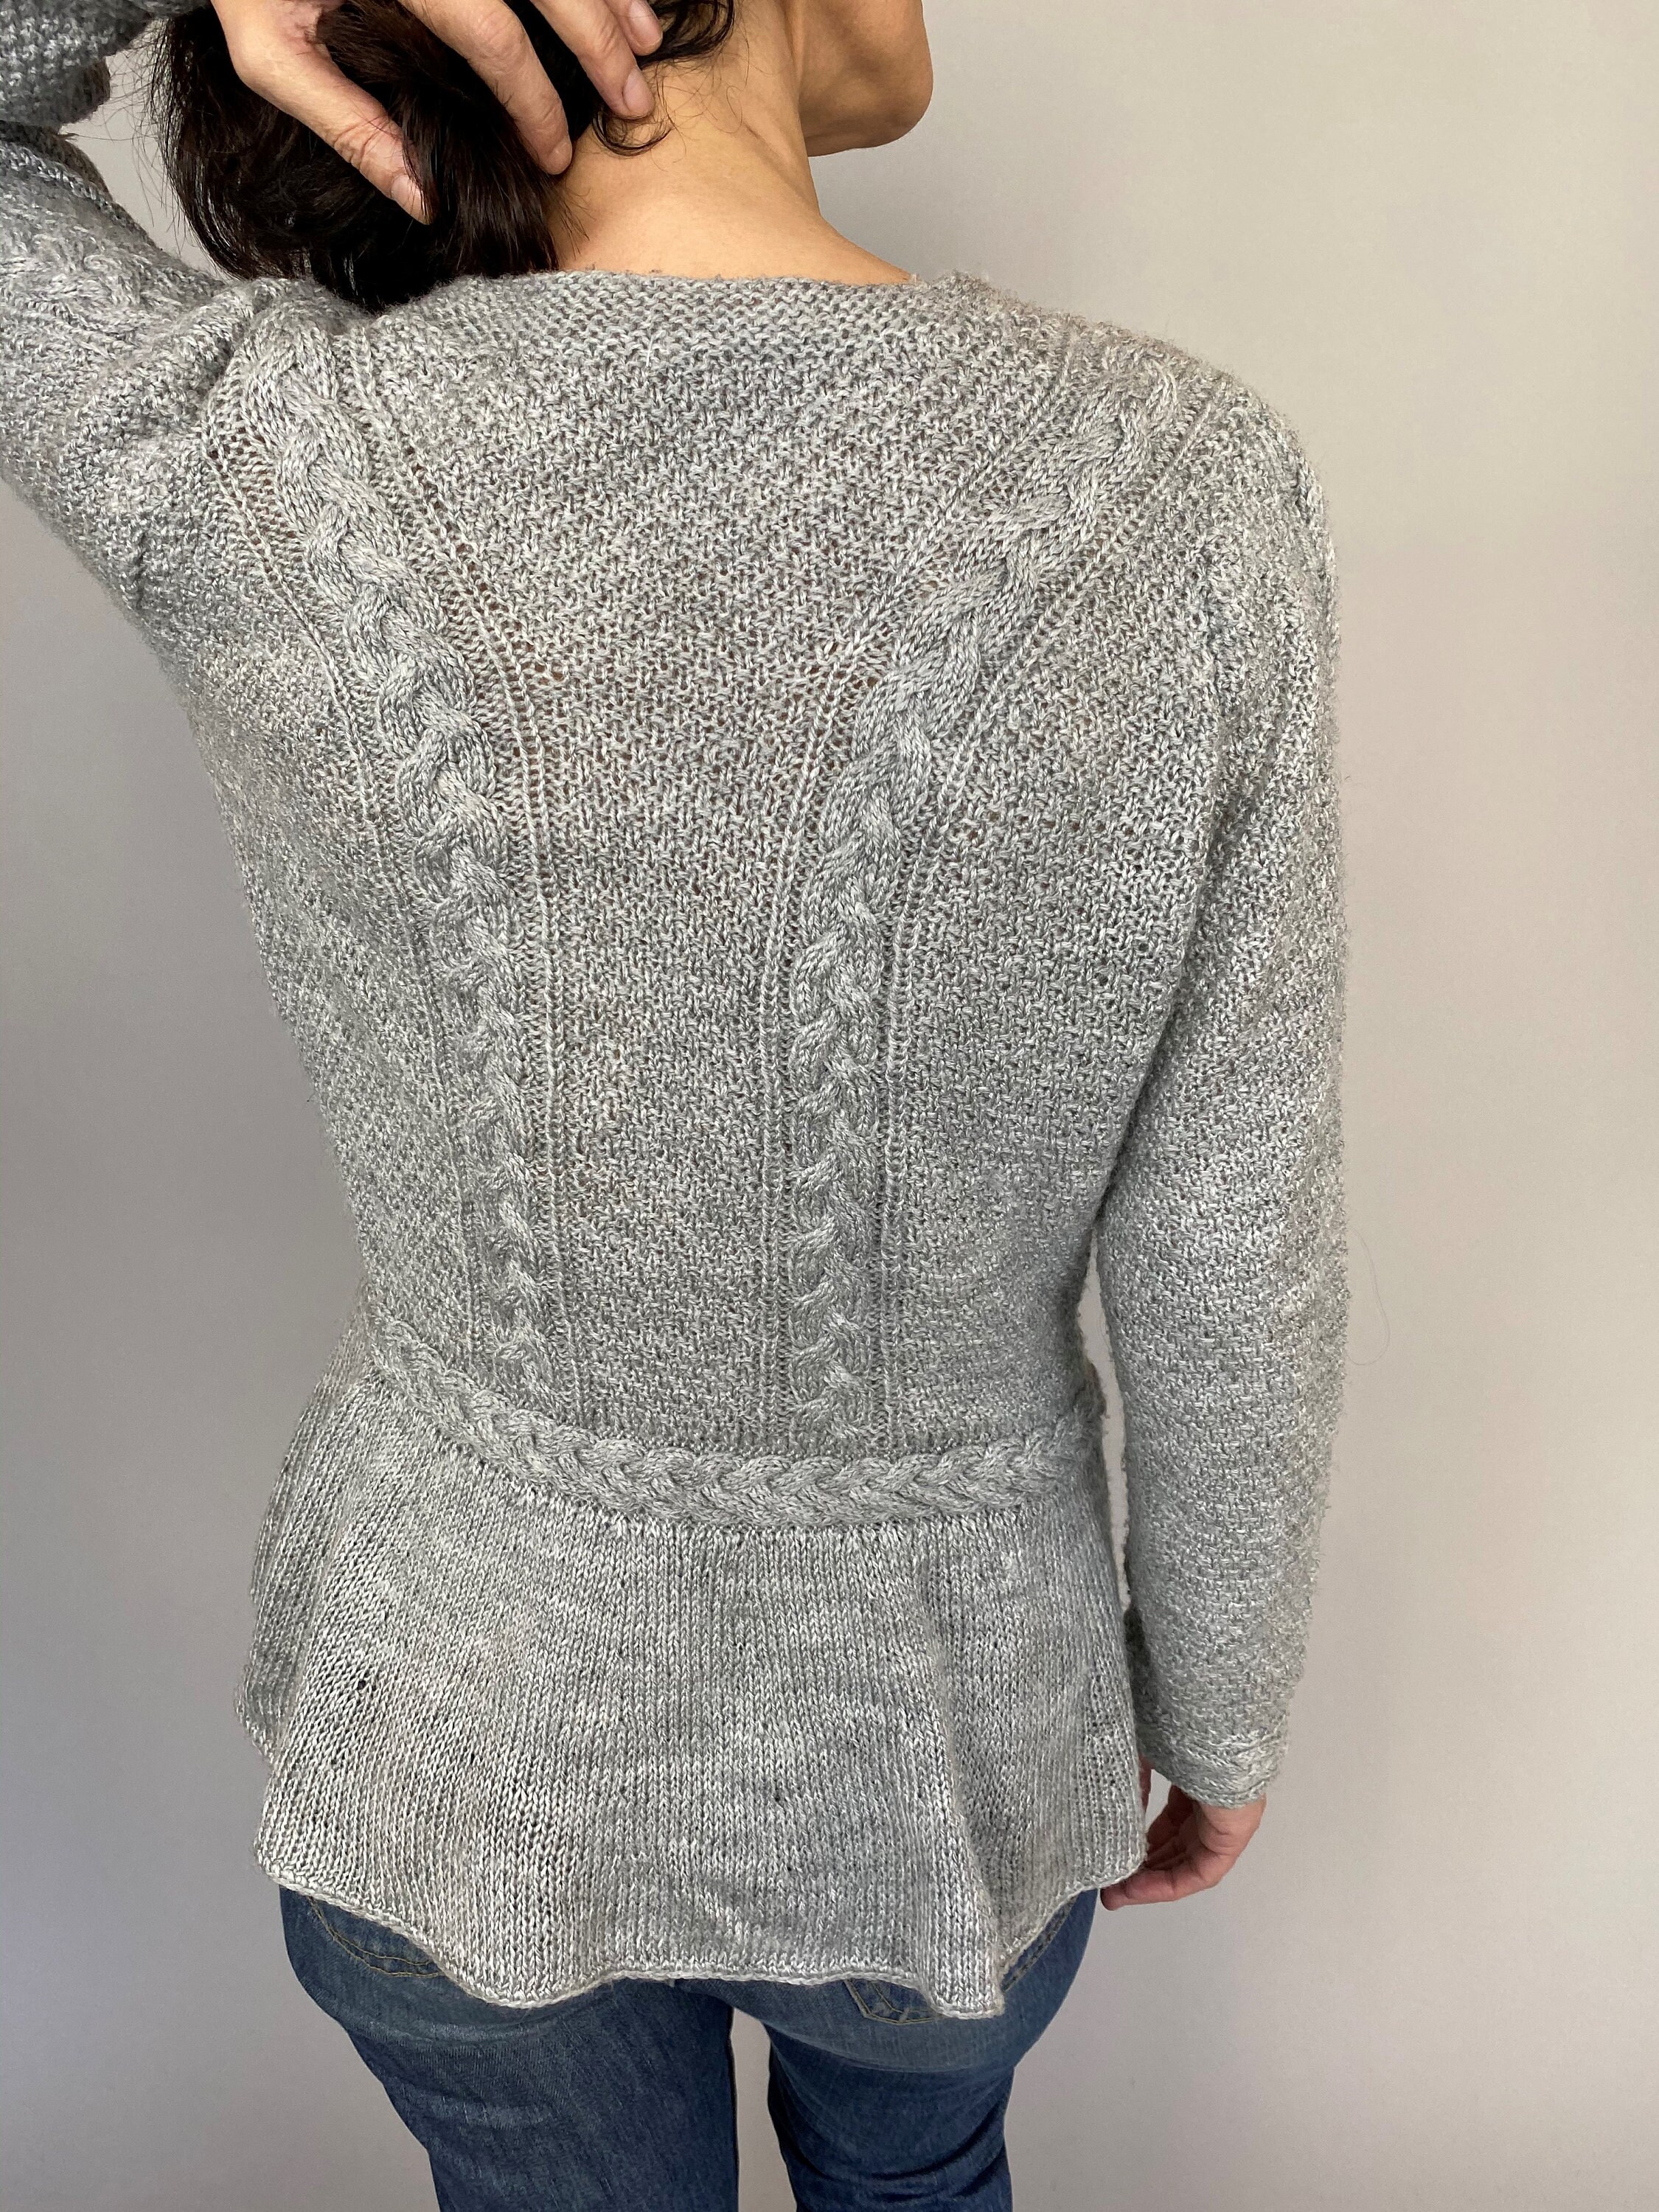 Vintage Gray Hand Knitted Austrian Wool Cardigan for Women - Etsy UK